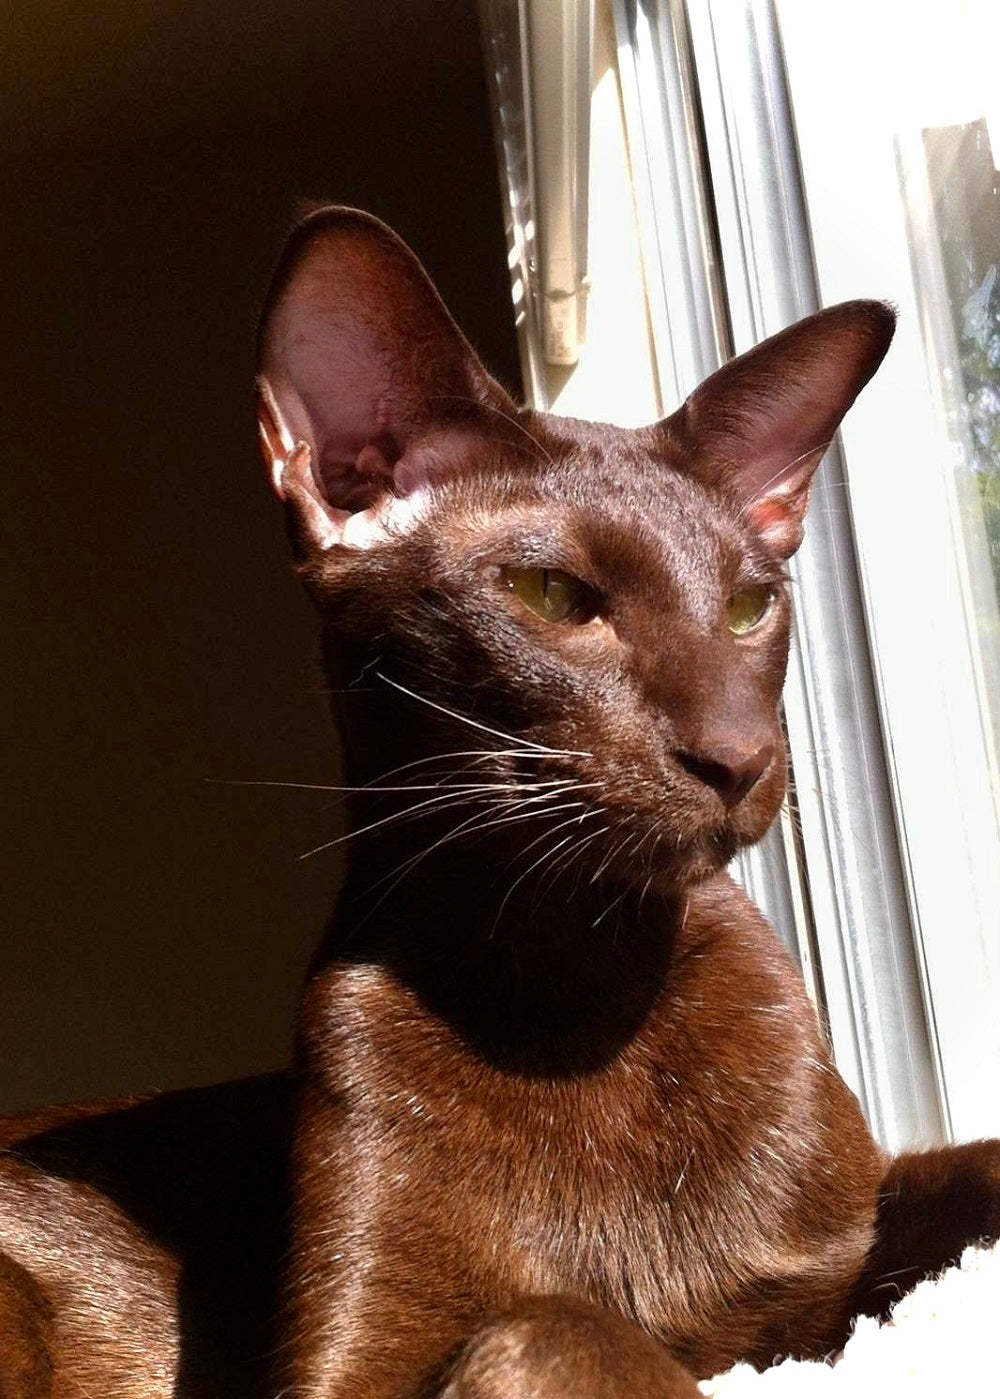 October Cool Cat of the Month: Meet Moshe!